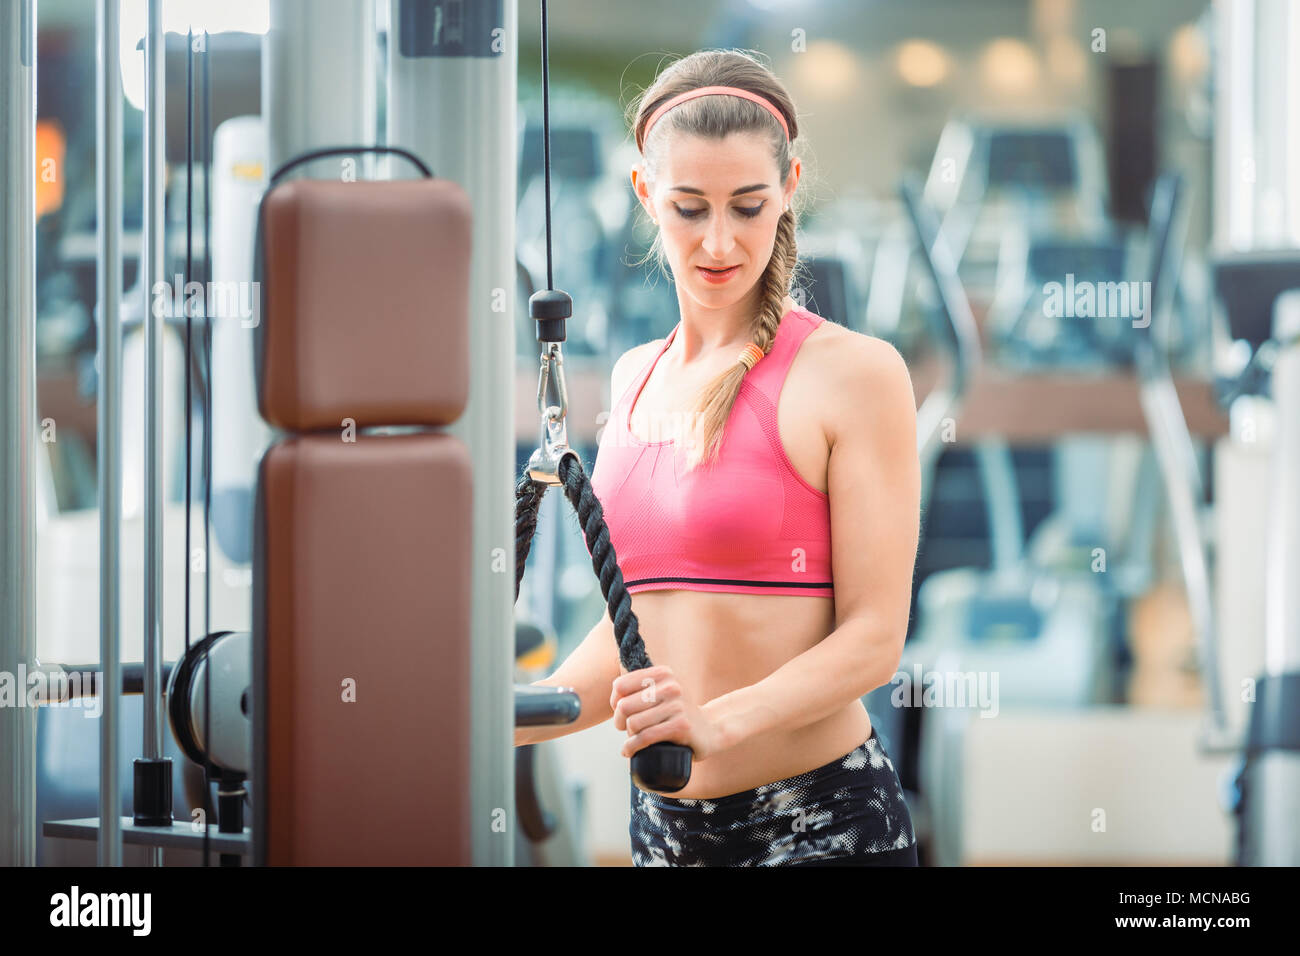 https://c8.alamy.com/comp/MCNABG/happy-fit-woman-wearing-pink-fitness-bra-while-exercising-at-the-gym-MCNABG.jpg